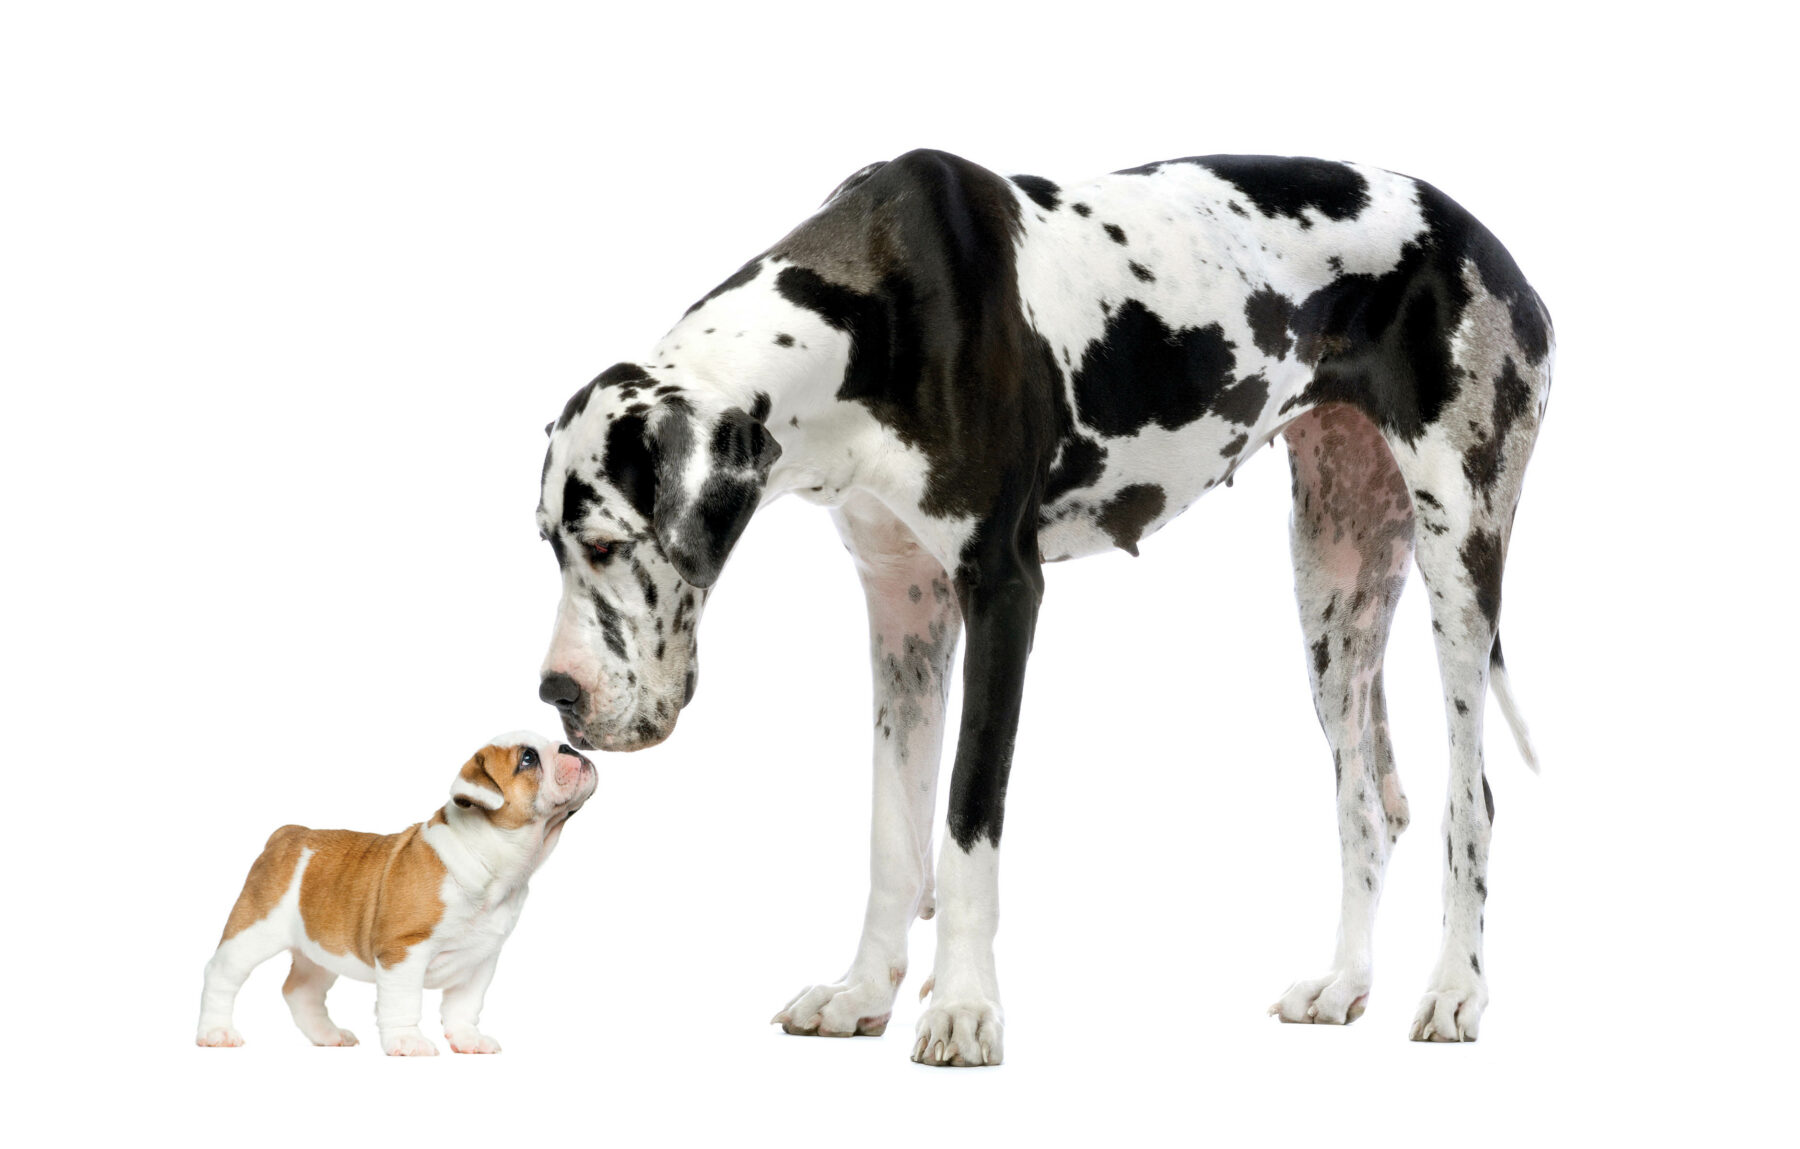 Great Dane looking at a French Bulldog puppy in front of a white background.